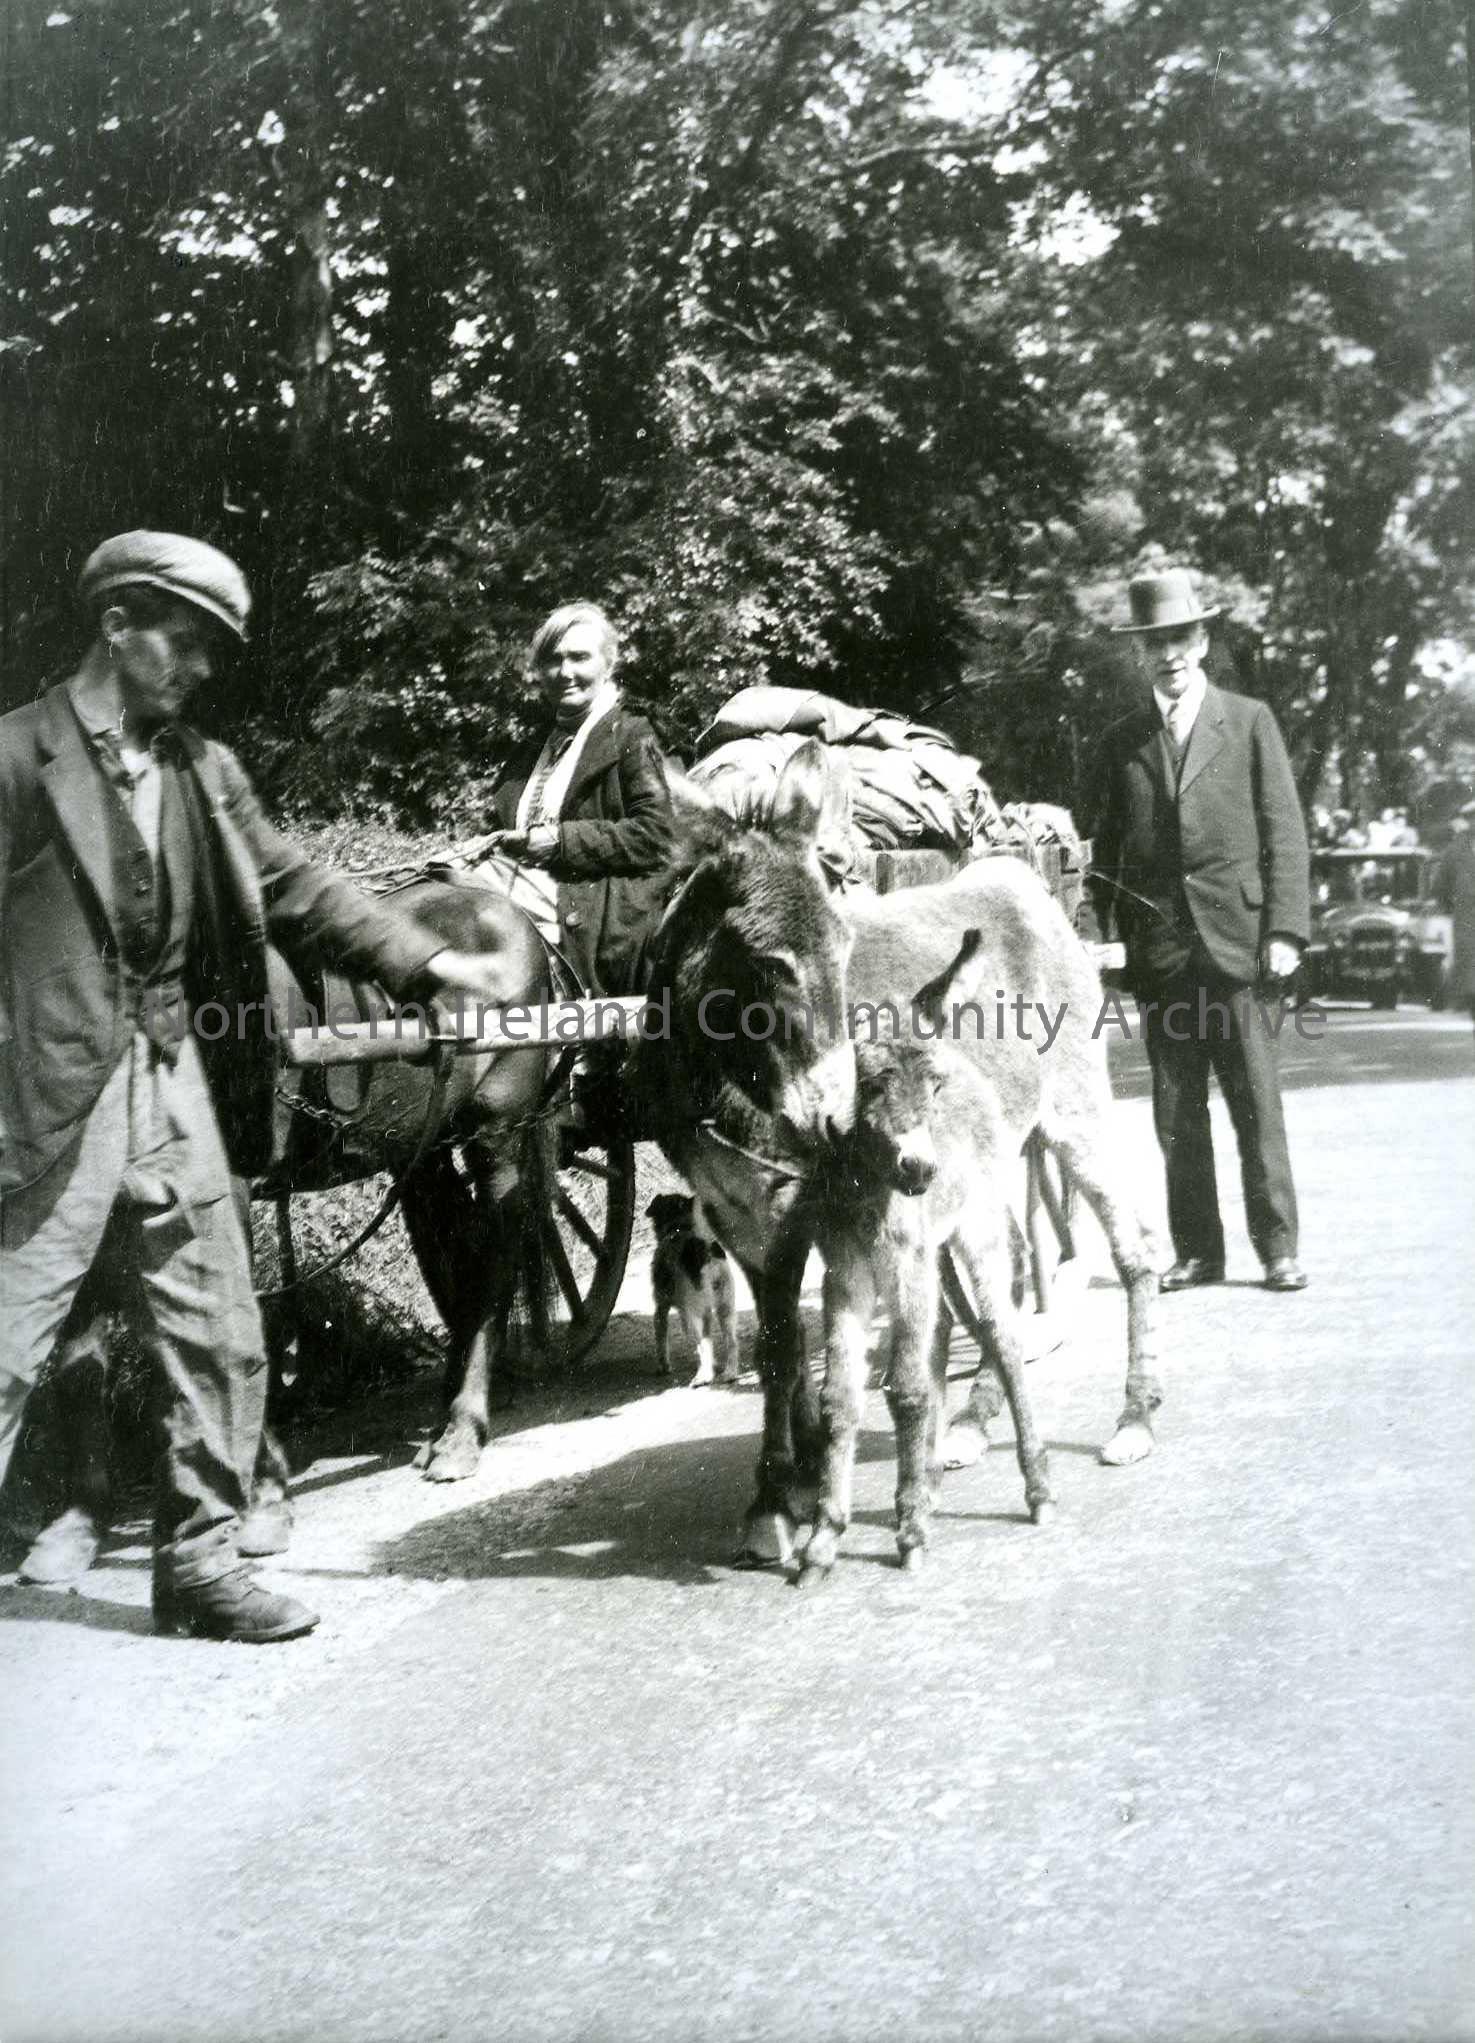 Printed black and white photograph – Woman and man stand with cart and donkeys. A well dressed man stands behind them.